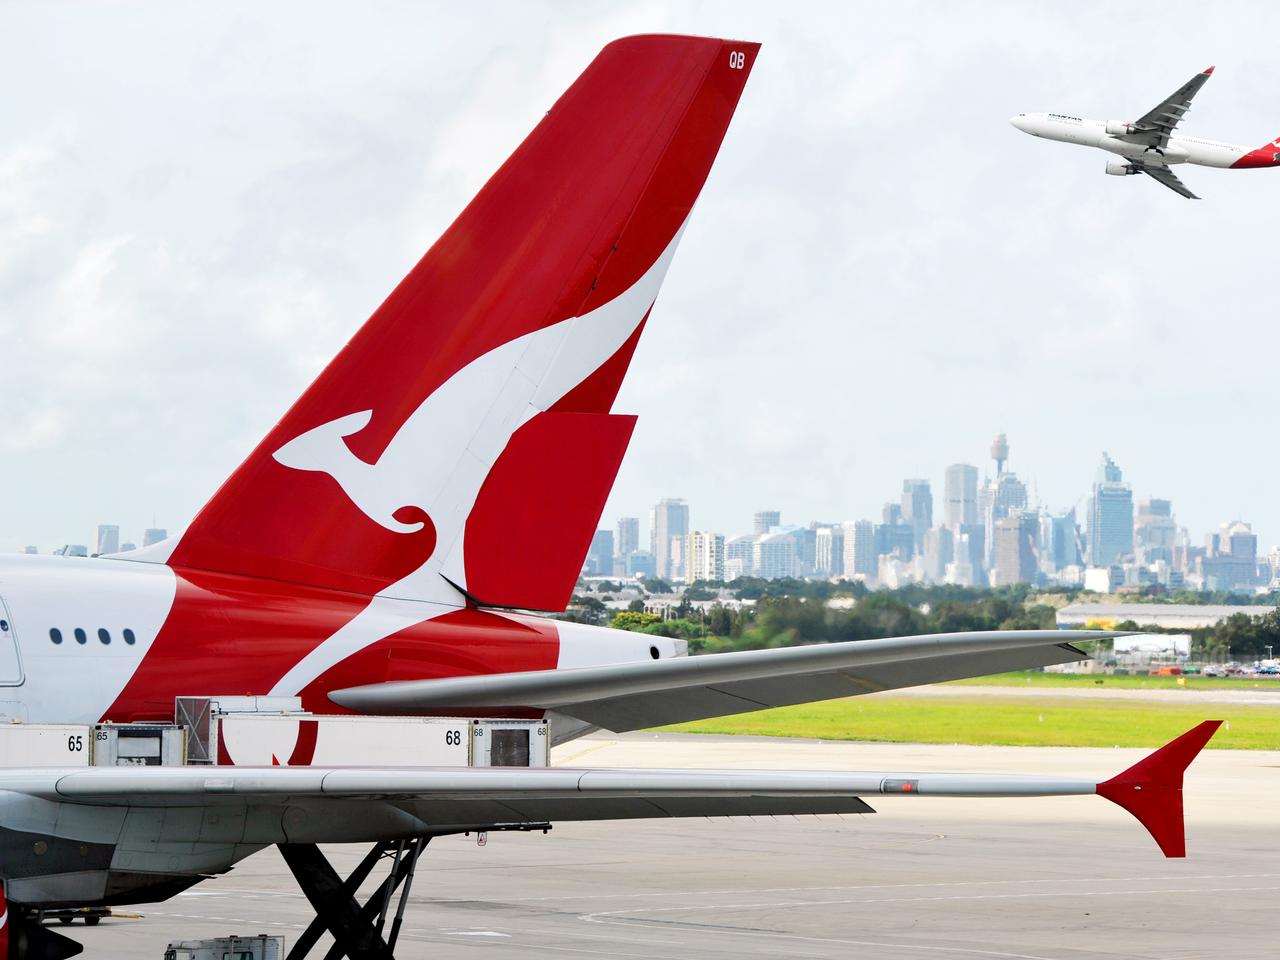 "Sydney, Australia - March, 14th 2012: Quantas aeroplanes and tail fin with the distant view of downtown Sydney - Sydney Airport"